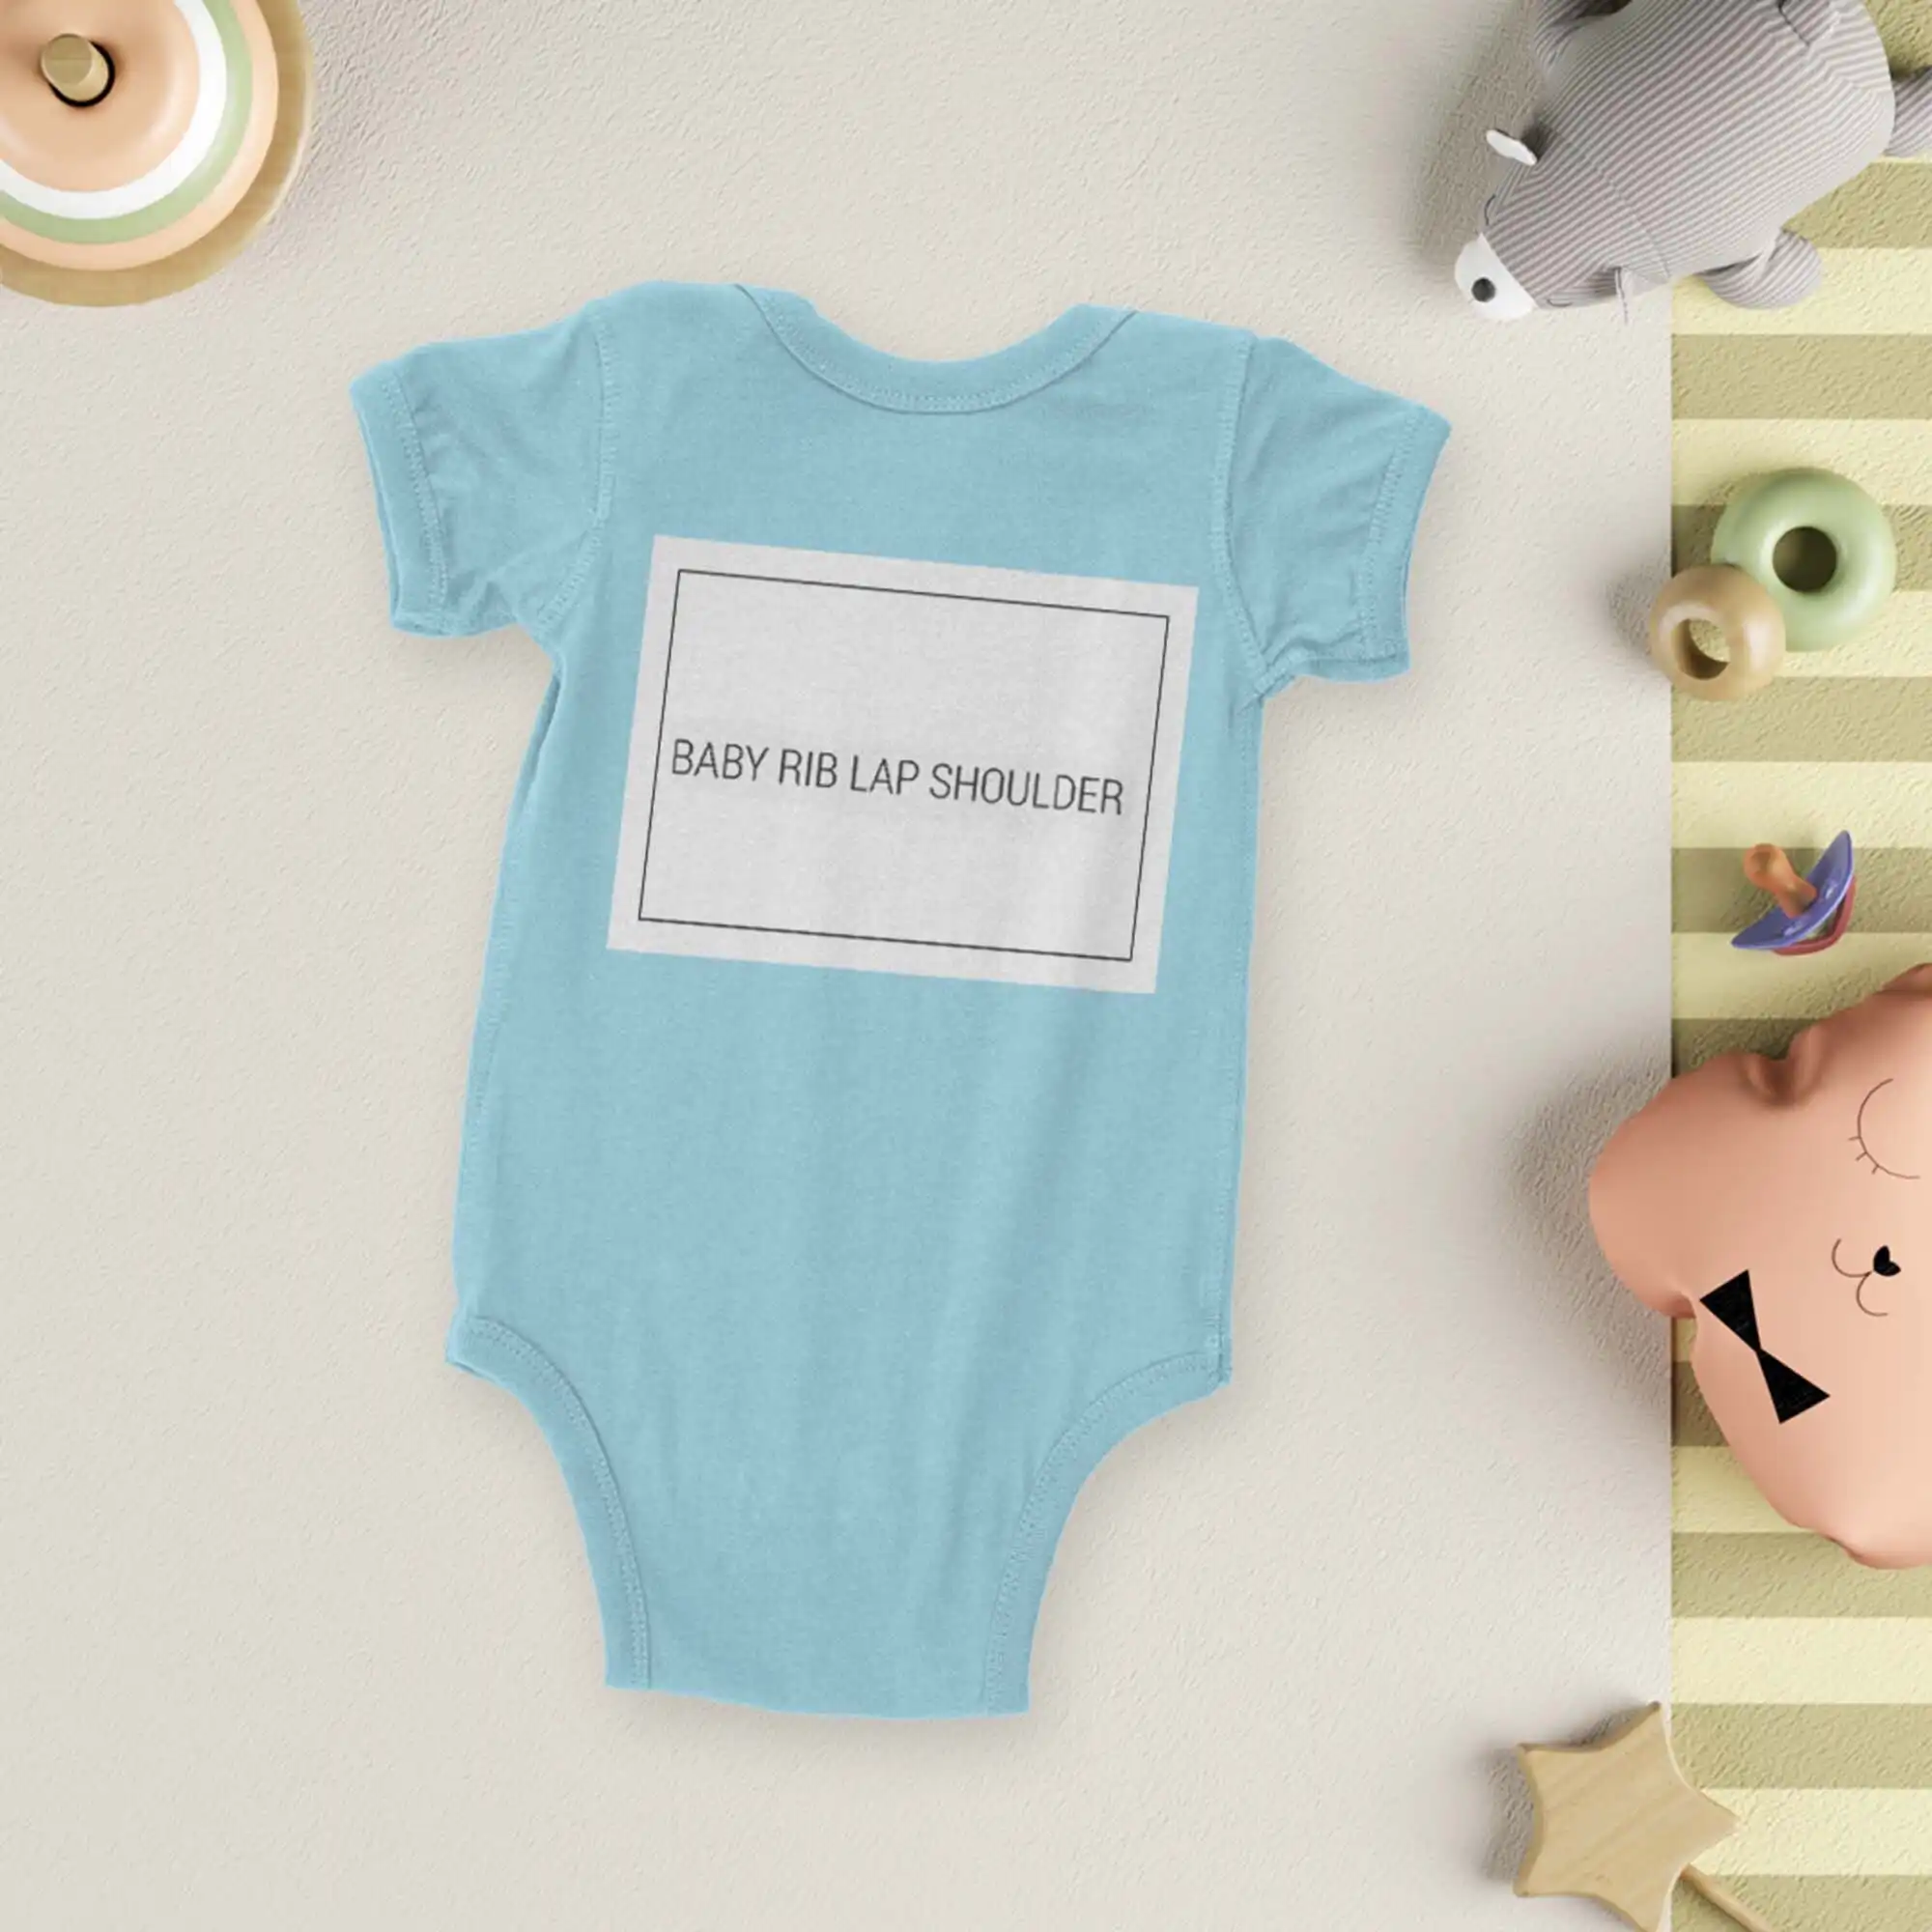 Apparel photography of baby suits on lifestyle background using domyshoot app